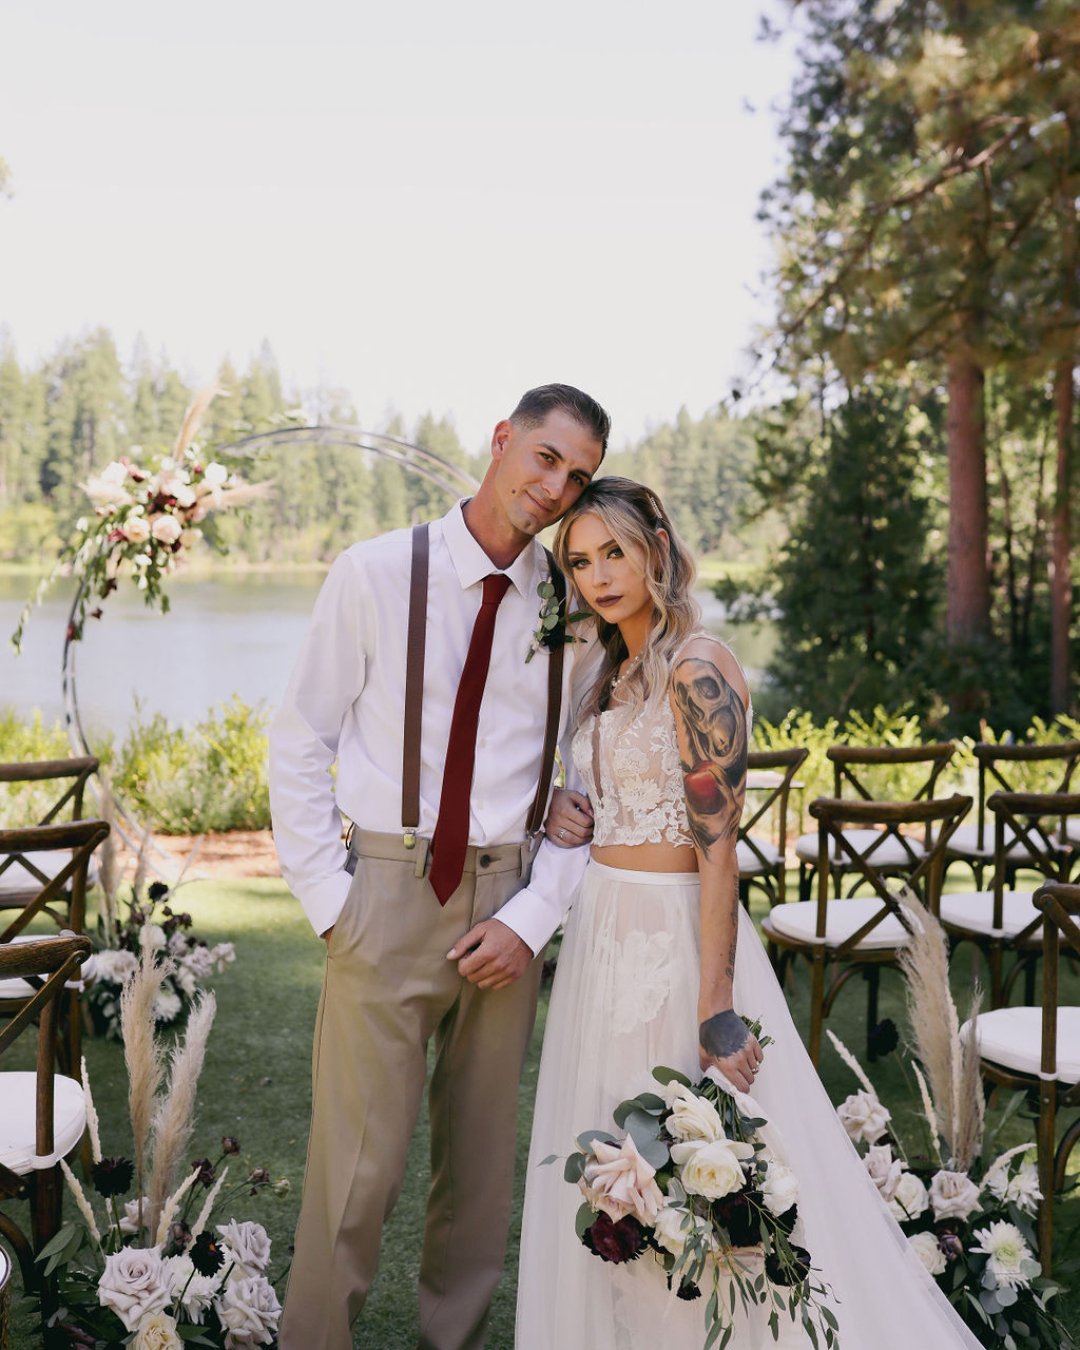 Tiffany &amp; Sean 🥂 This pair's romantic elopement featured bold roses &amp; plumes of pampas grass. Our favorite detail was Tiffany's stunner of a wedding dress &ndash; a two piece with a lace bodice and a flowing skirt with a long train. ⁣
Photo: